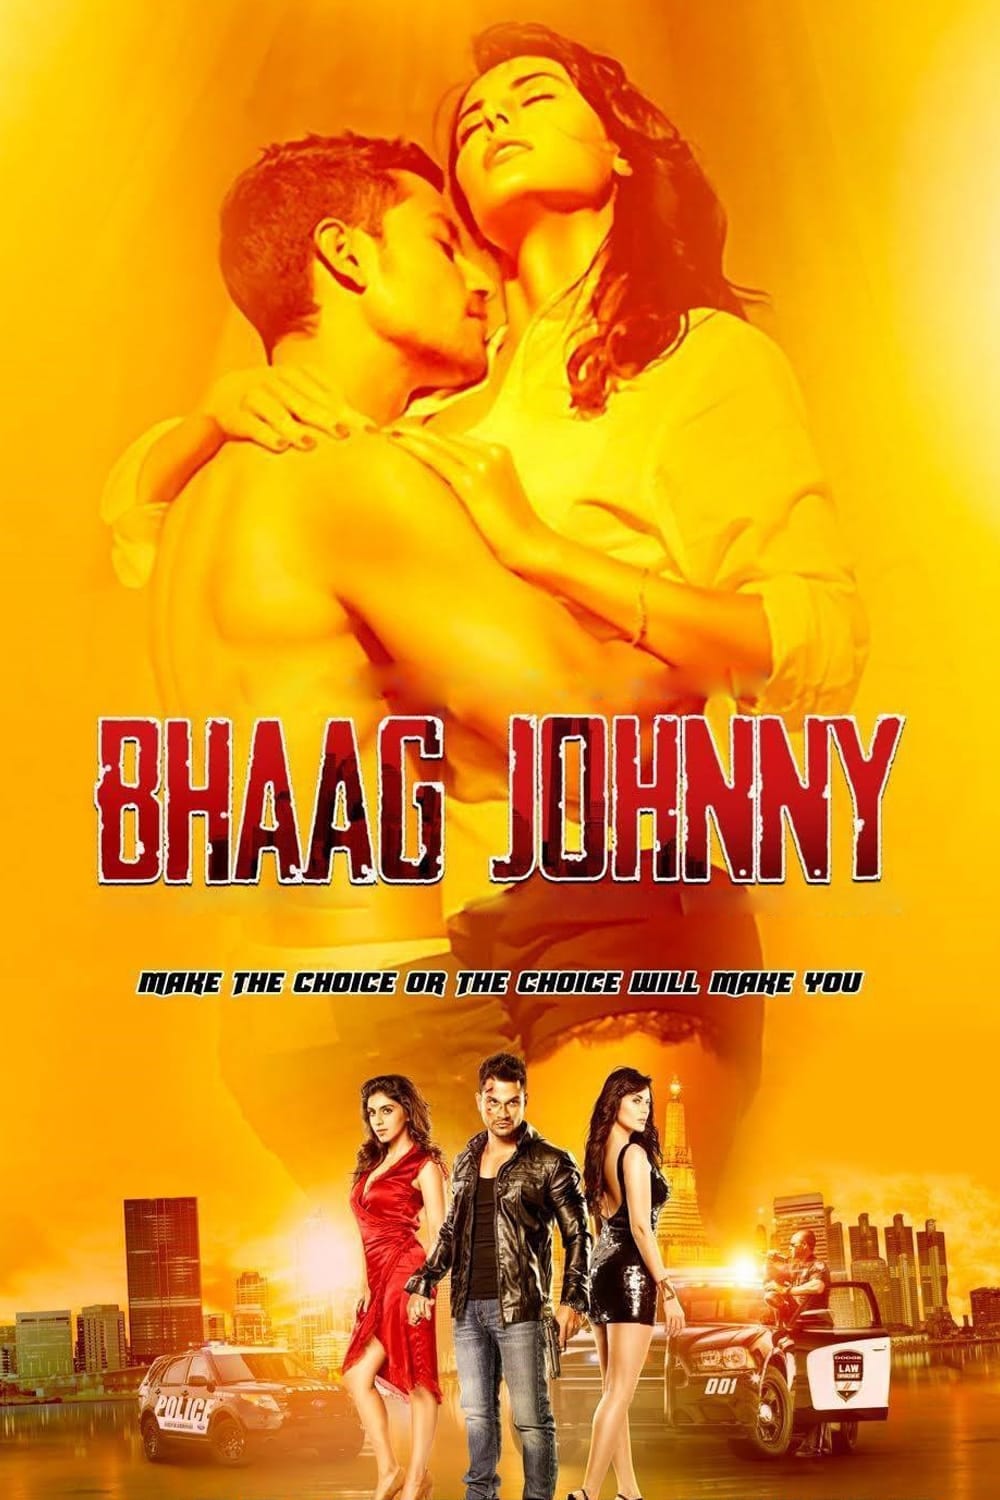 Poster for the movie "Bhaag Johnny"